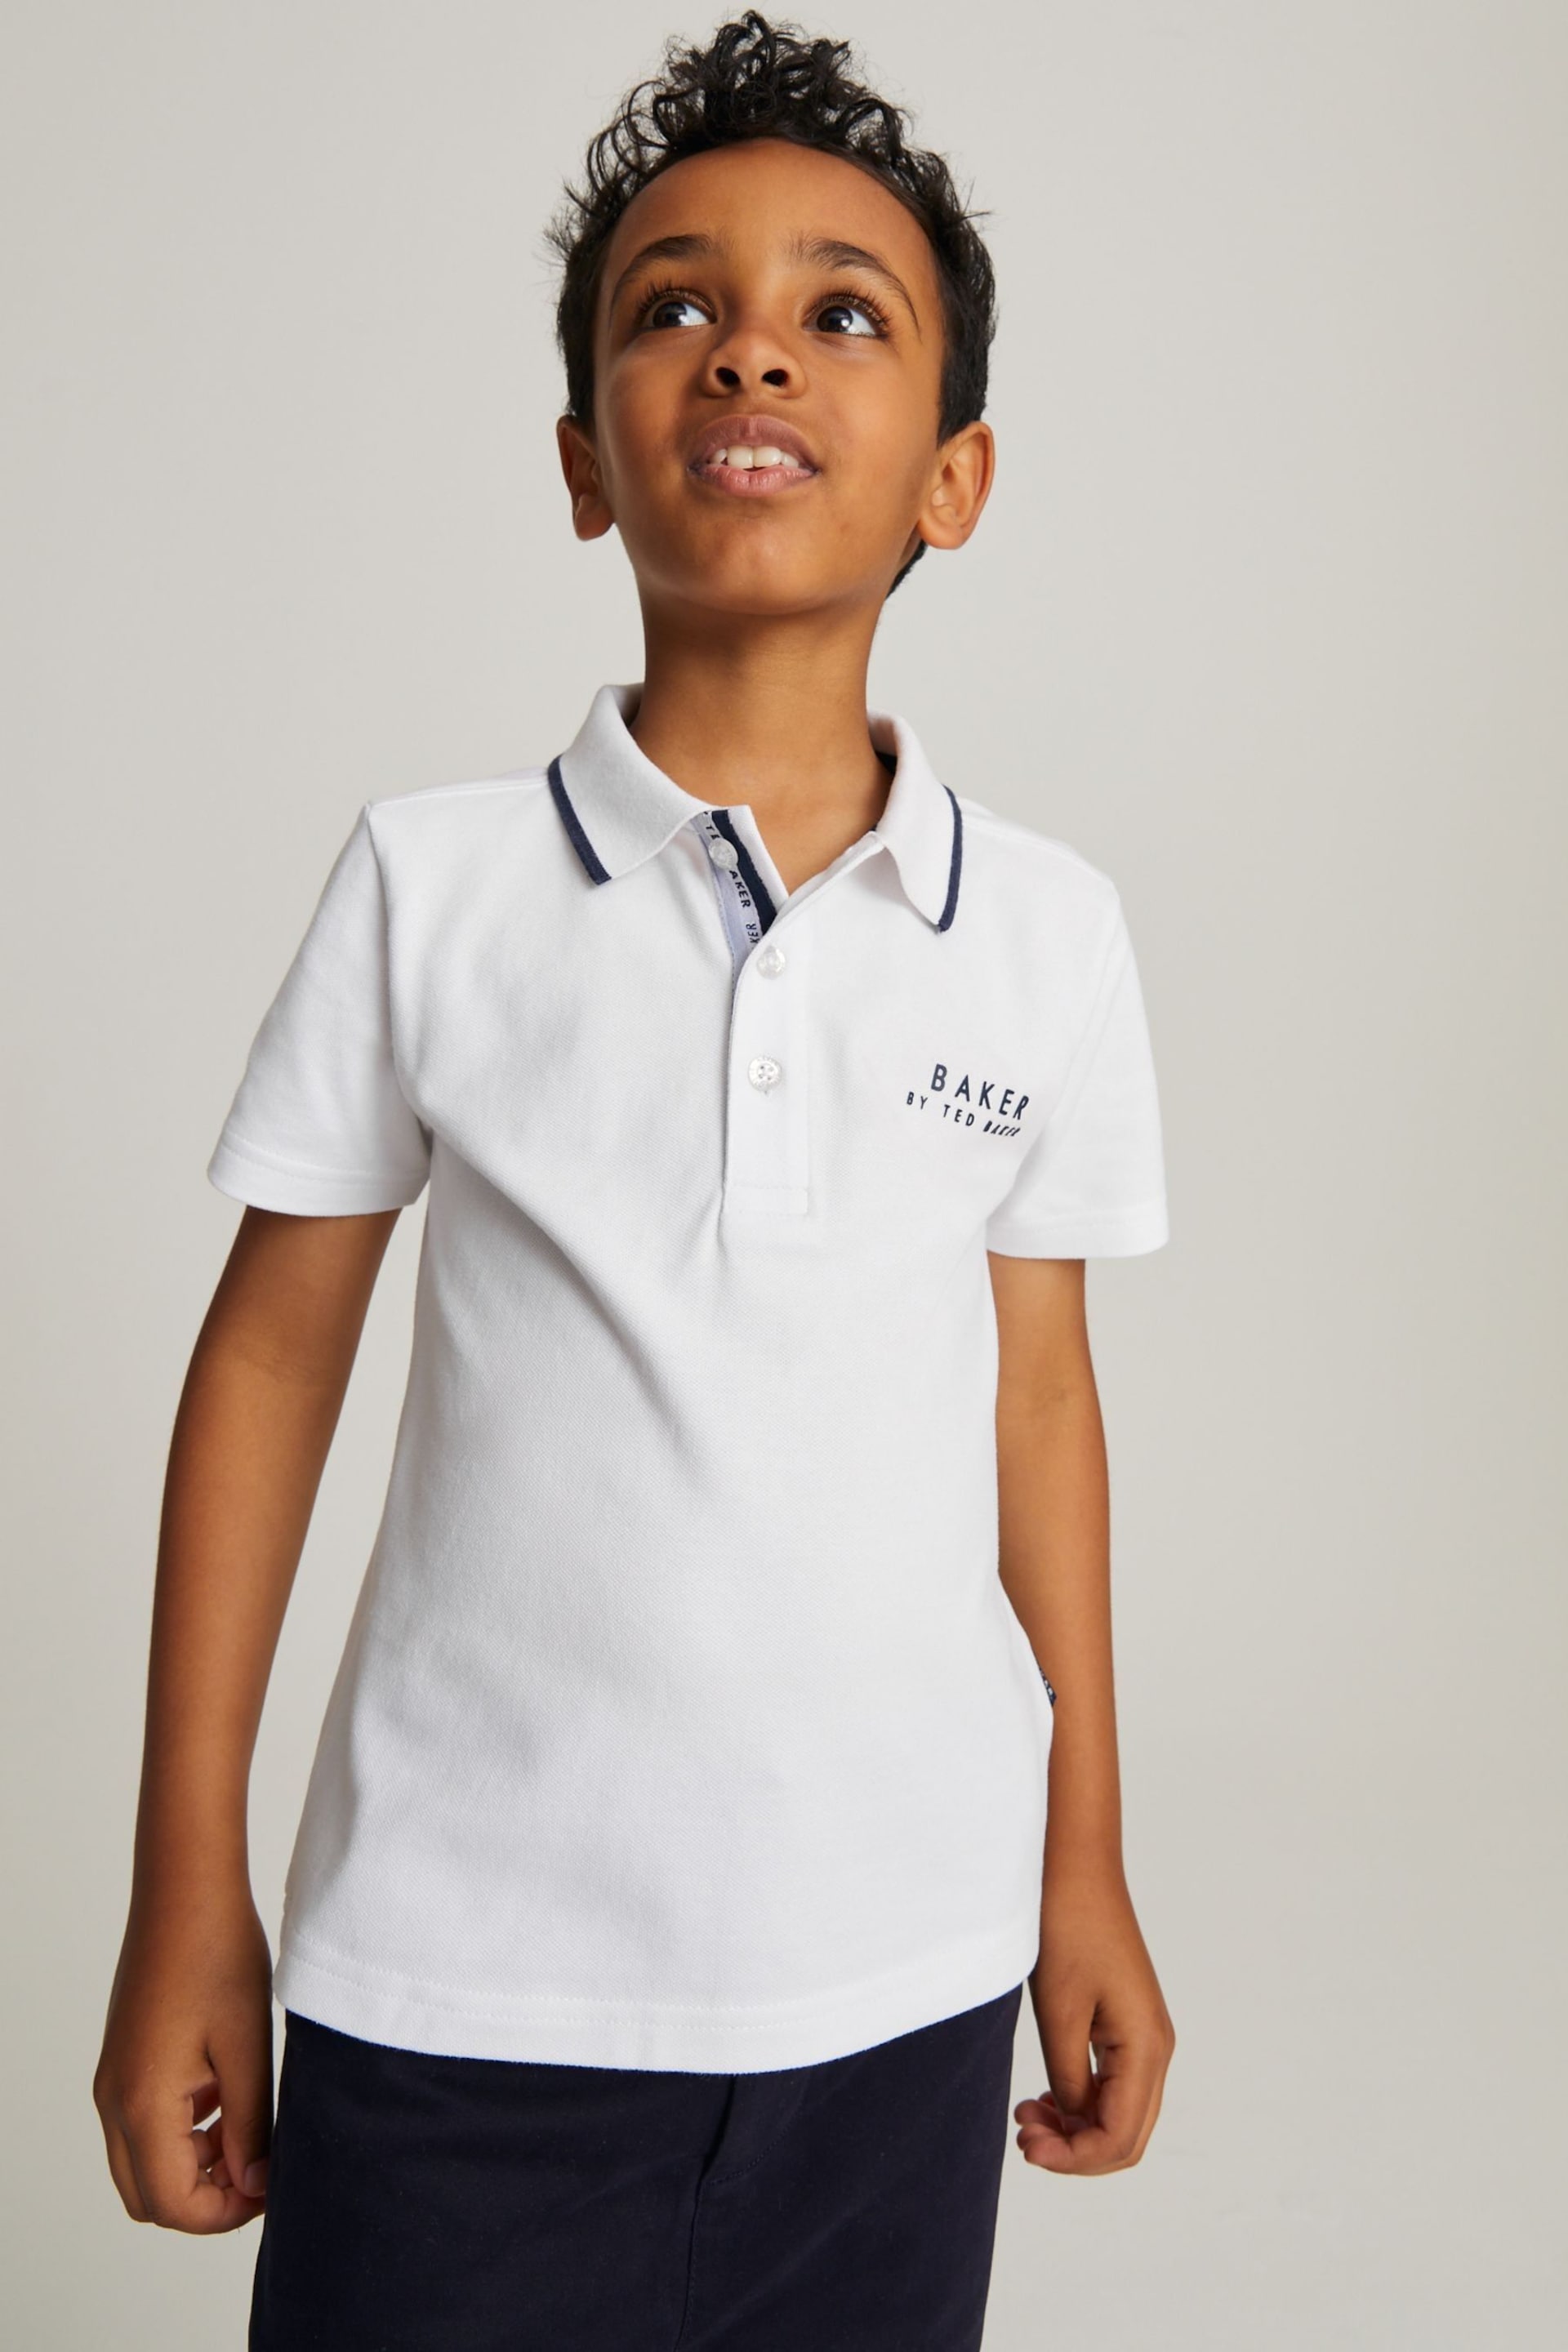 Baker by Ted Baker Polo Shirt - Image 1 of 8